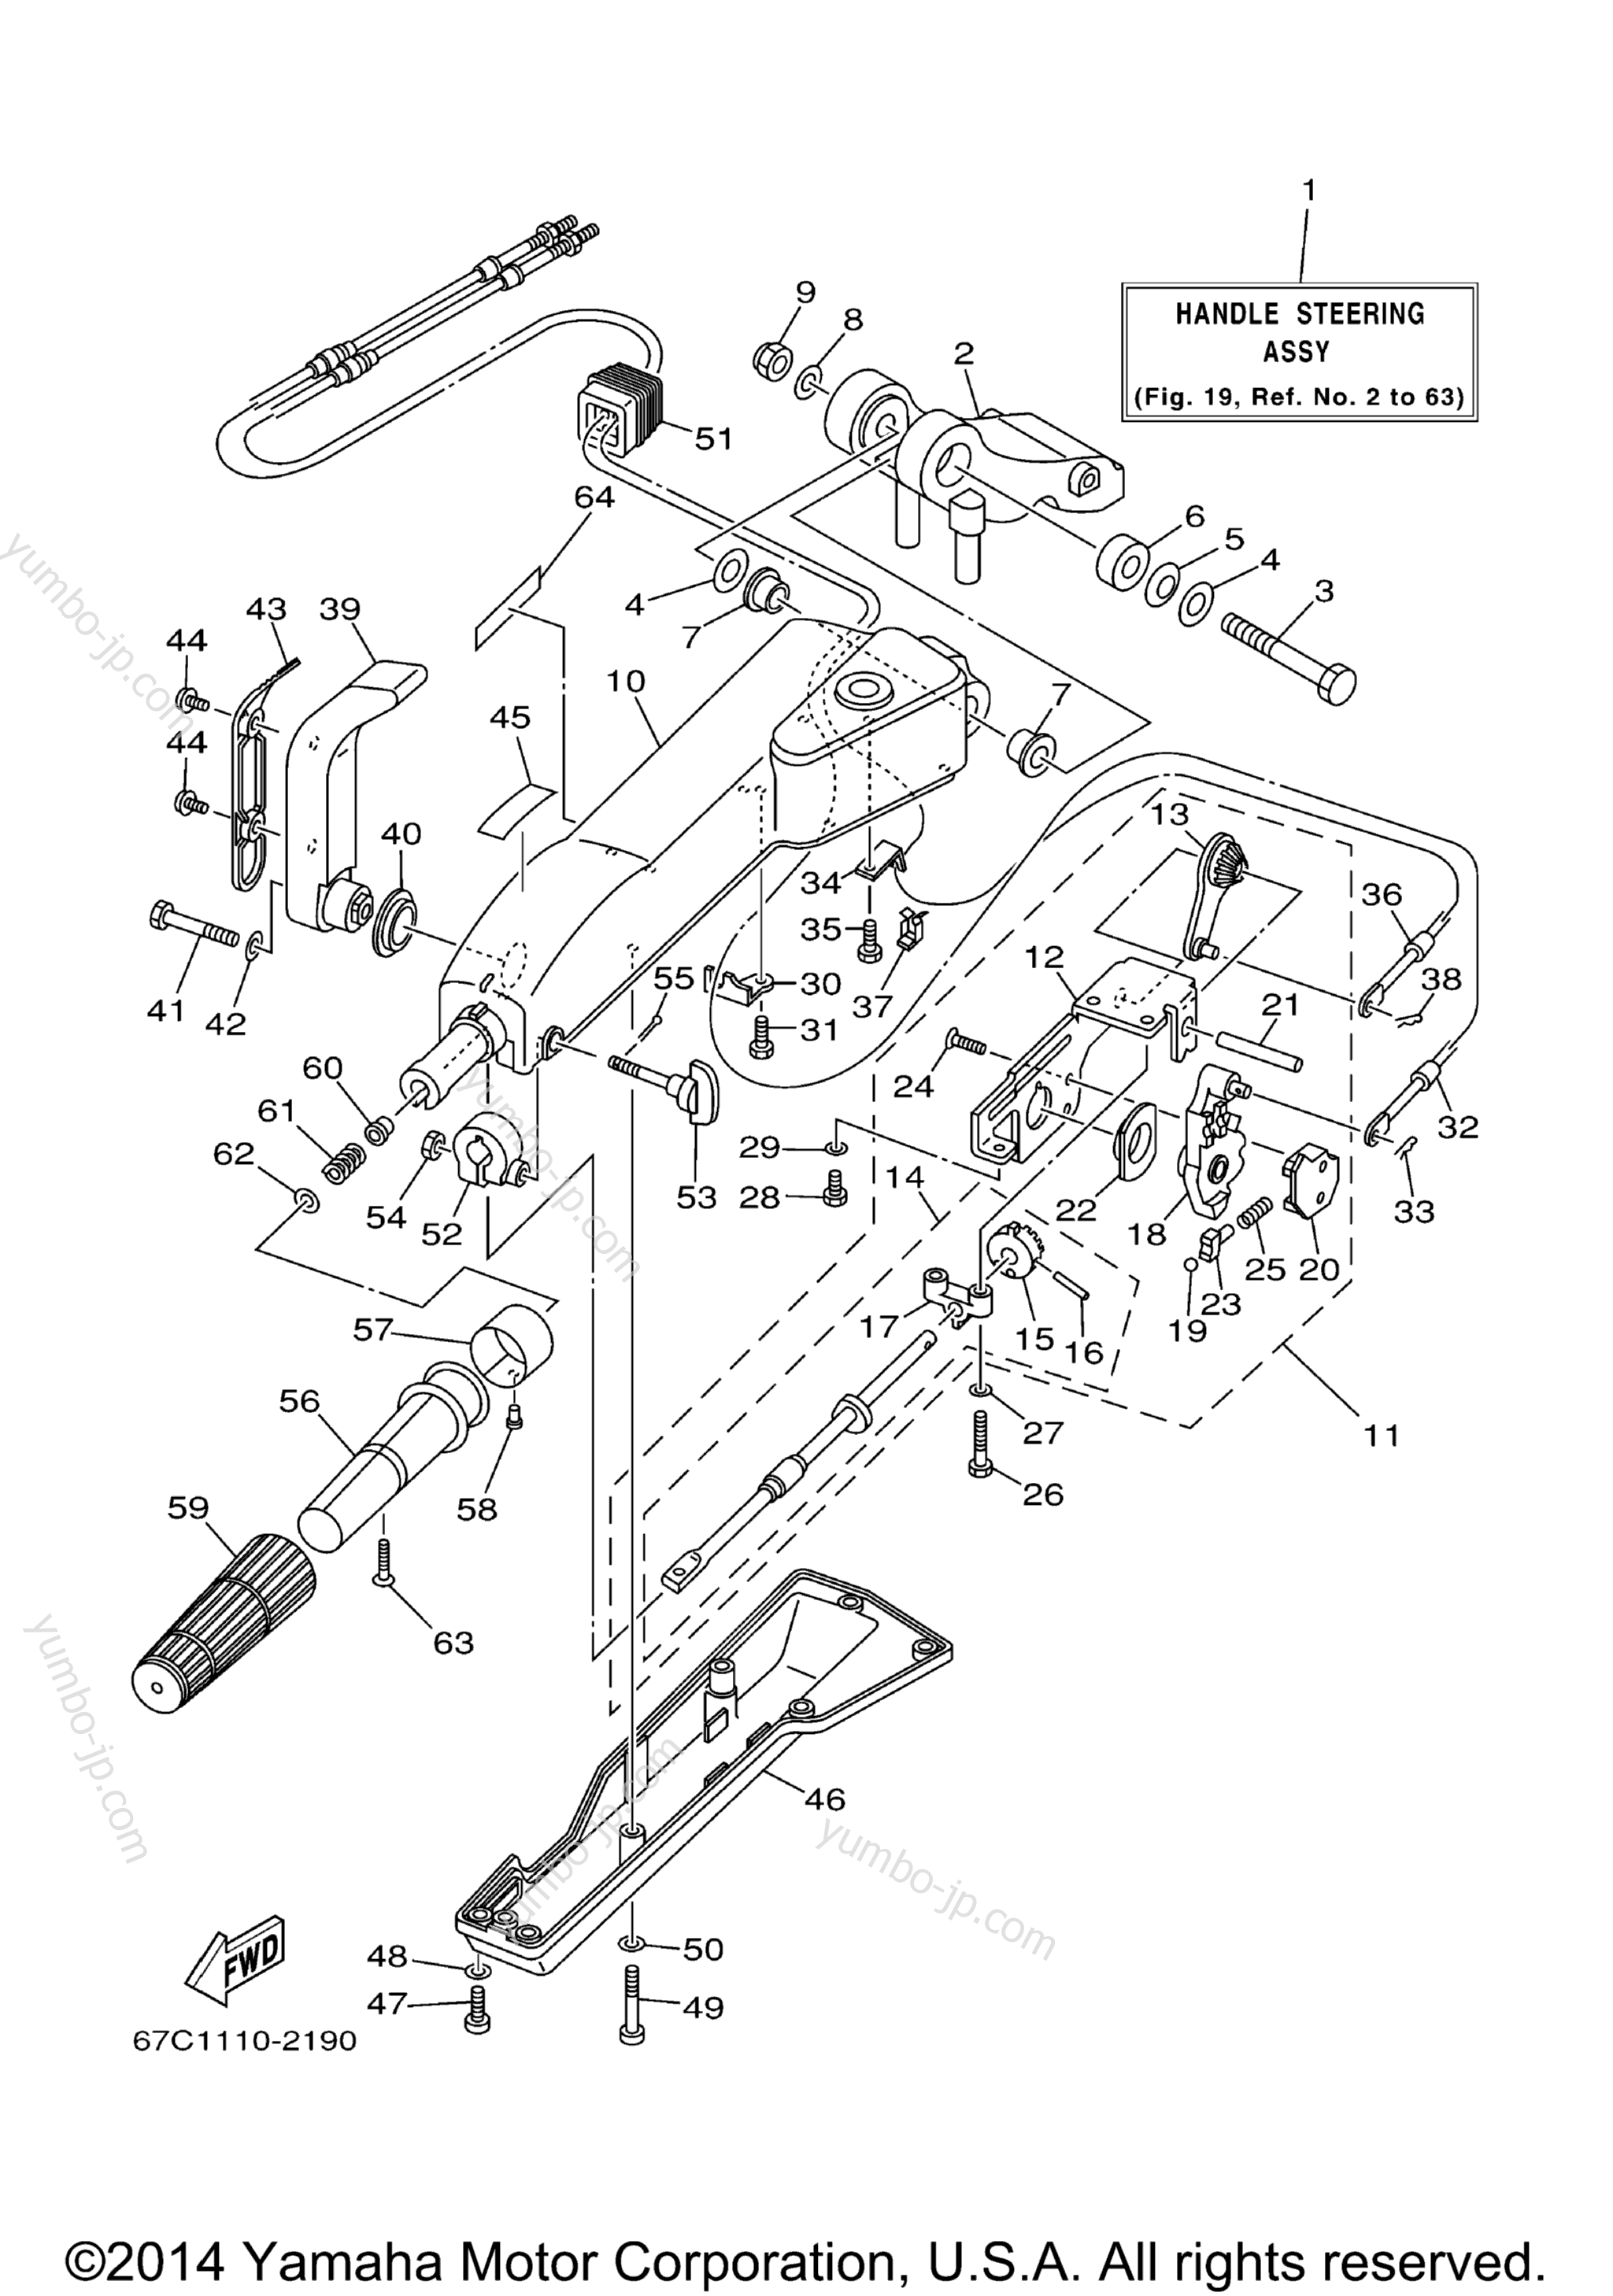 Steering Mh for outboards YAMAHA F40MSHB_MLHB_MJHB_EJRB_ESRB_TLRB (F40TLRB) 2003 year